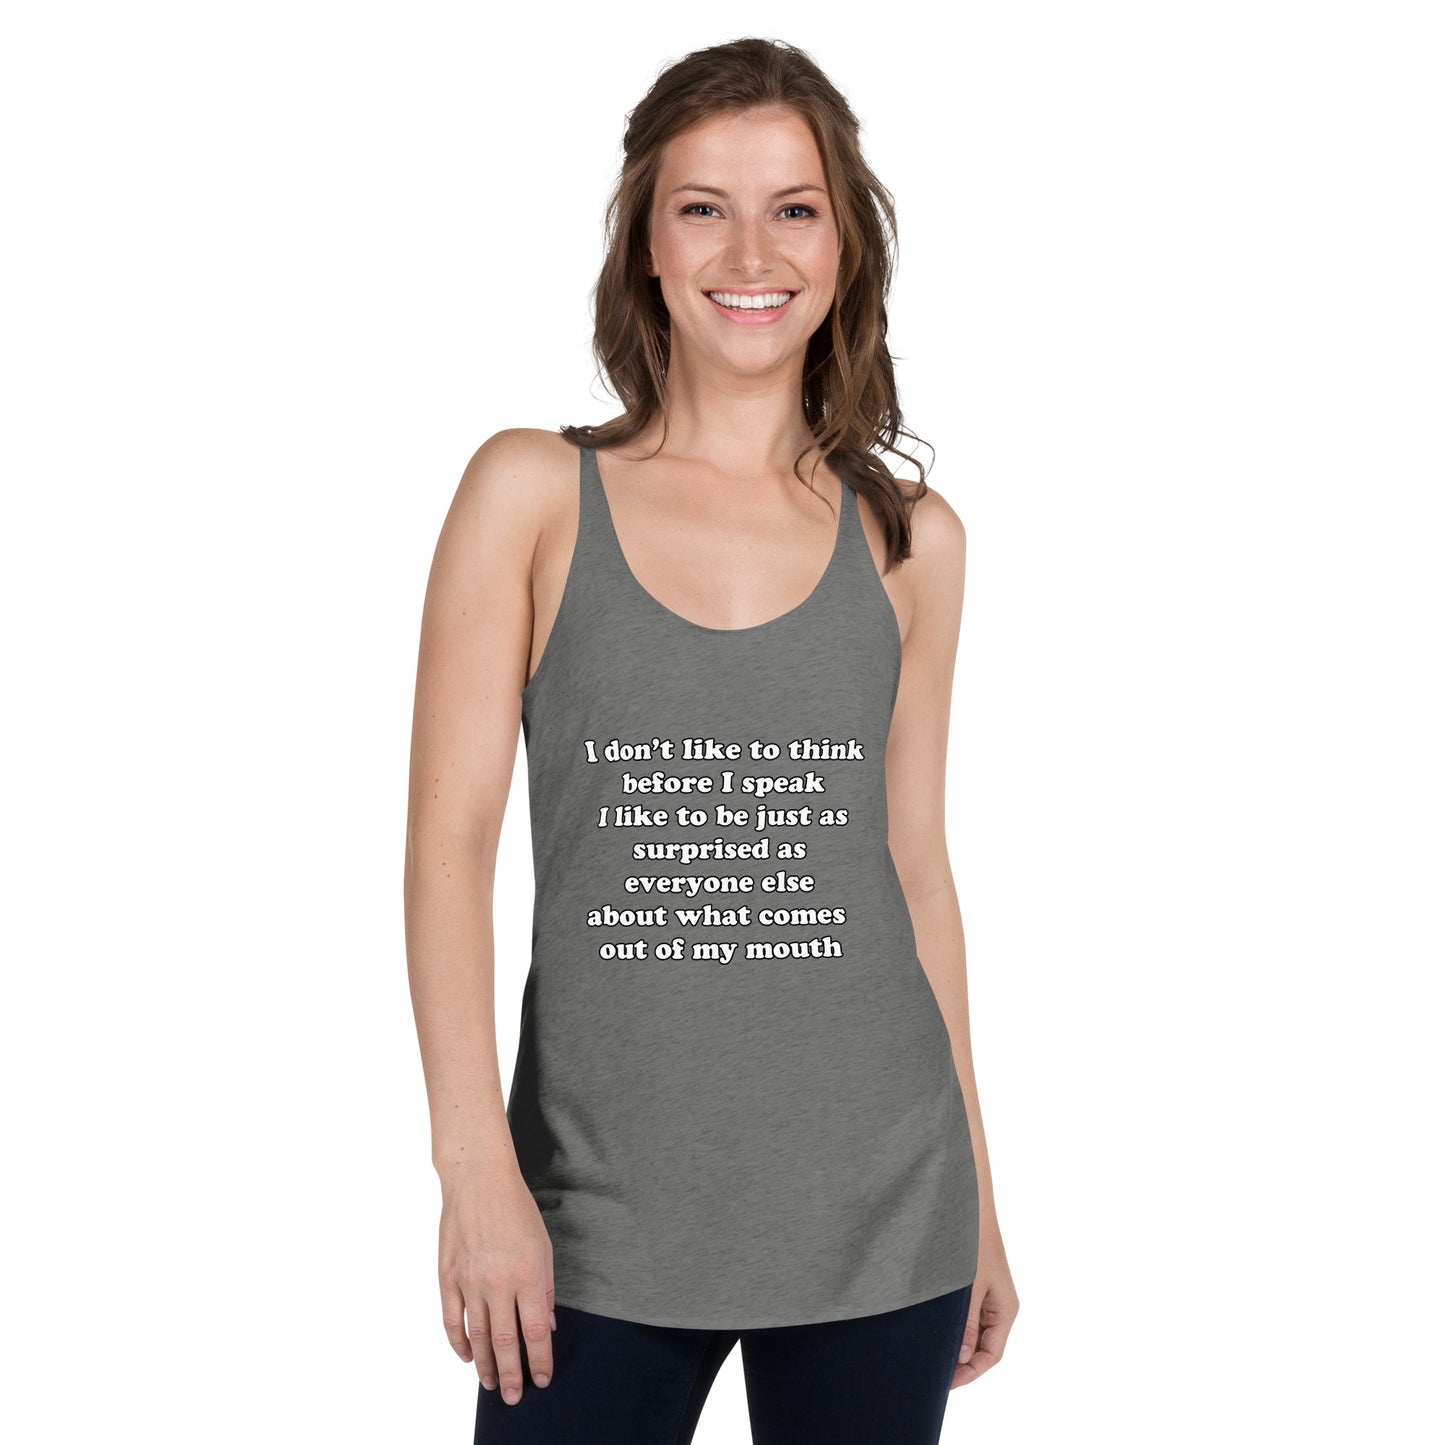 Woman with grey tank top with text “I don't think before I speak Just as serprised as everyone about what comes out of my mouth"